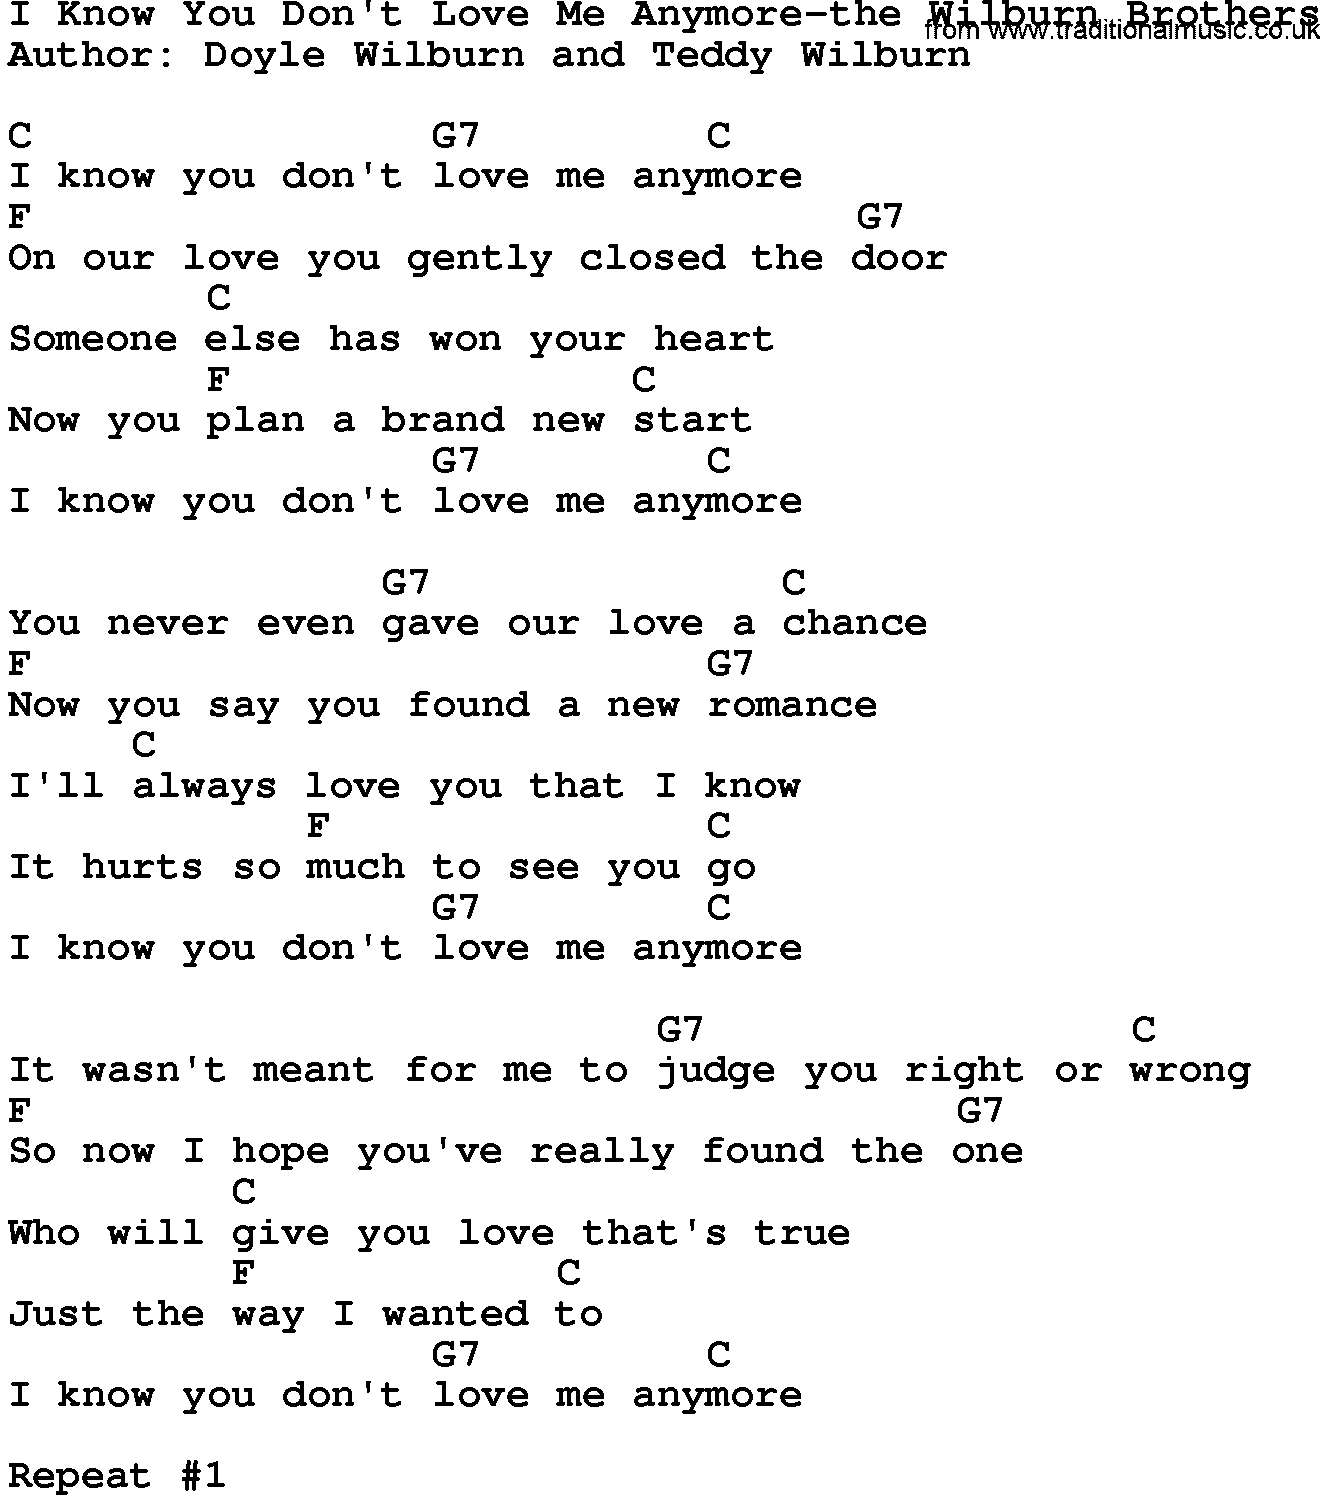 Country music song: I Know You Don't Love Me Anymore-The Wilburn Brothers lyrics and chords